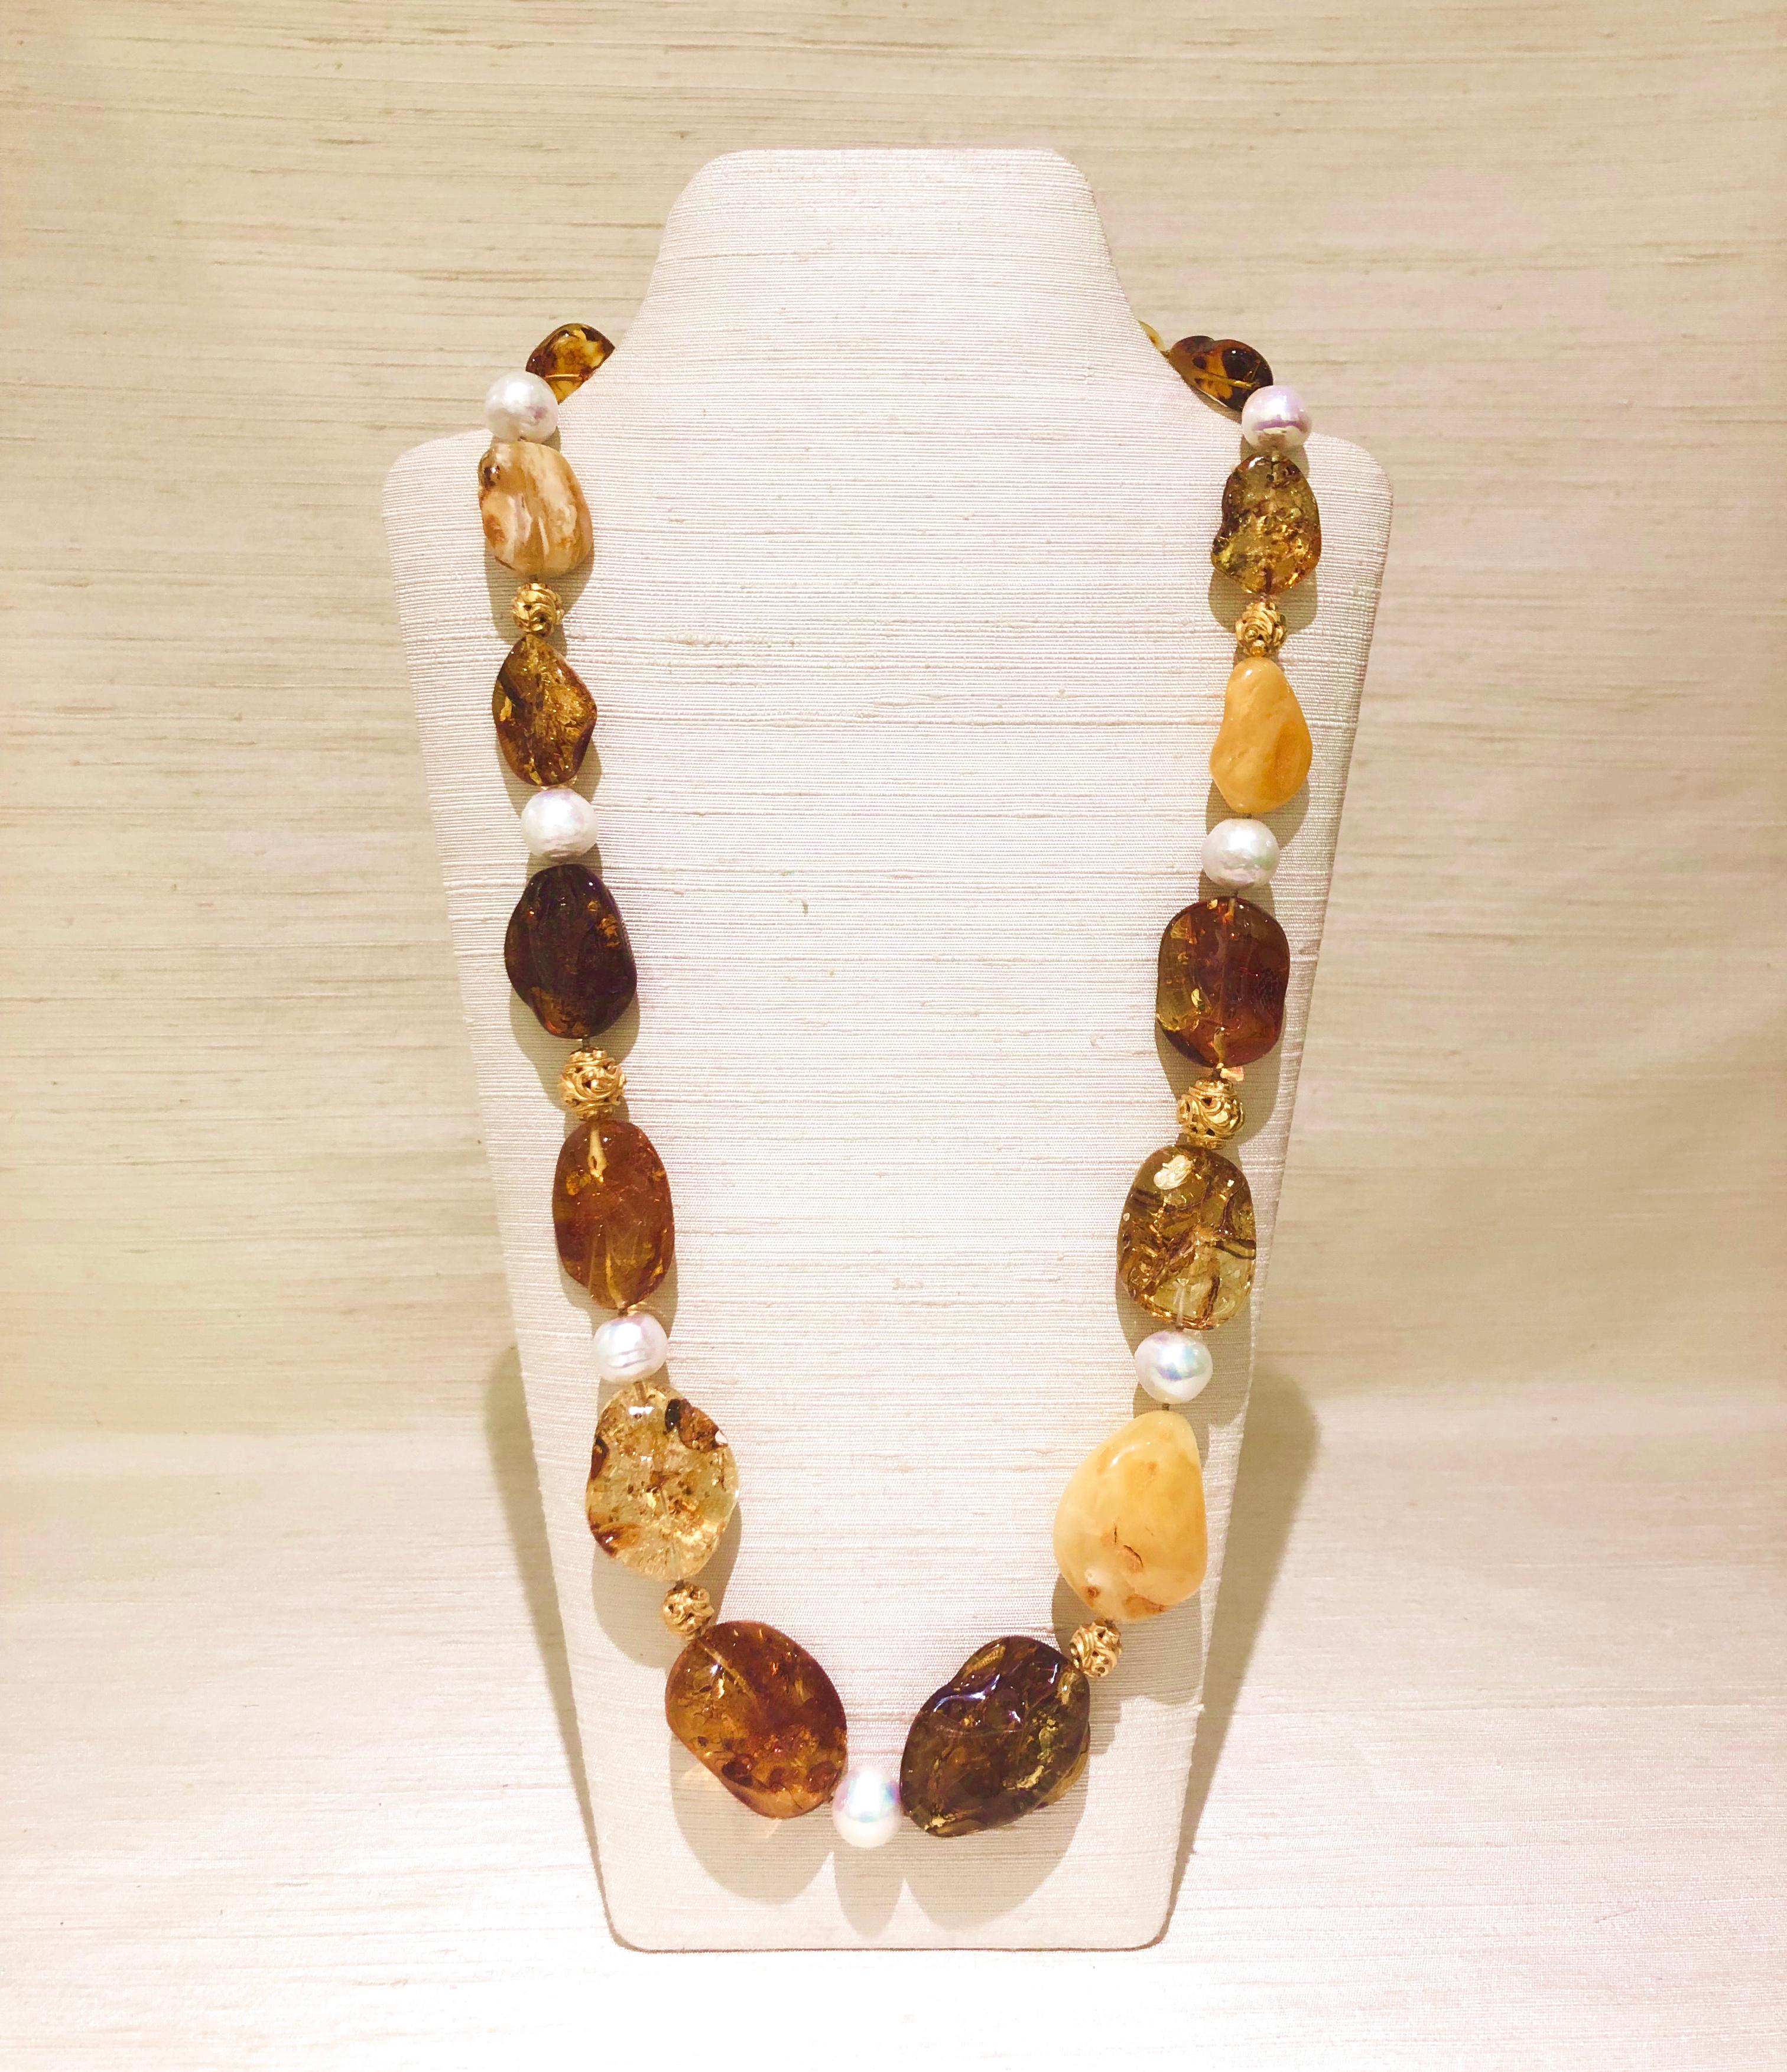 A charming  29”L (74cmL) necklace with pebble Baltic amber beads ranging from 5/8”L (1.5cmL) to 1 ¾”L (4.5cmL) in butterscotch, lemon, honey, cognac and cherry colours, handcrafted 18 karat vintage carved gold beads, Baroque freshwater pearls, and